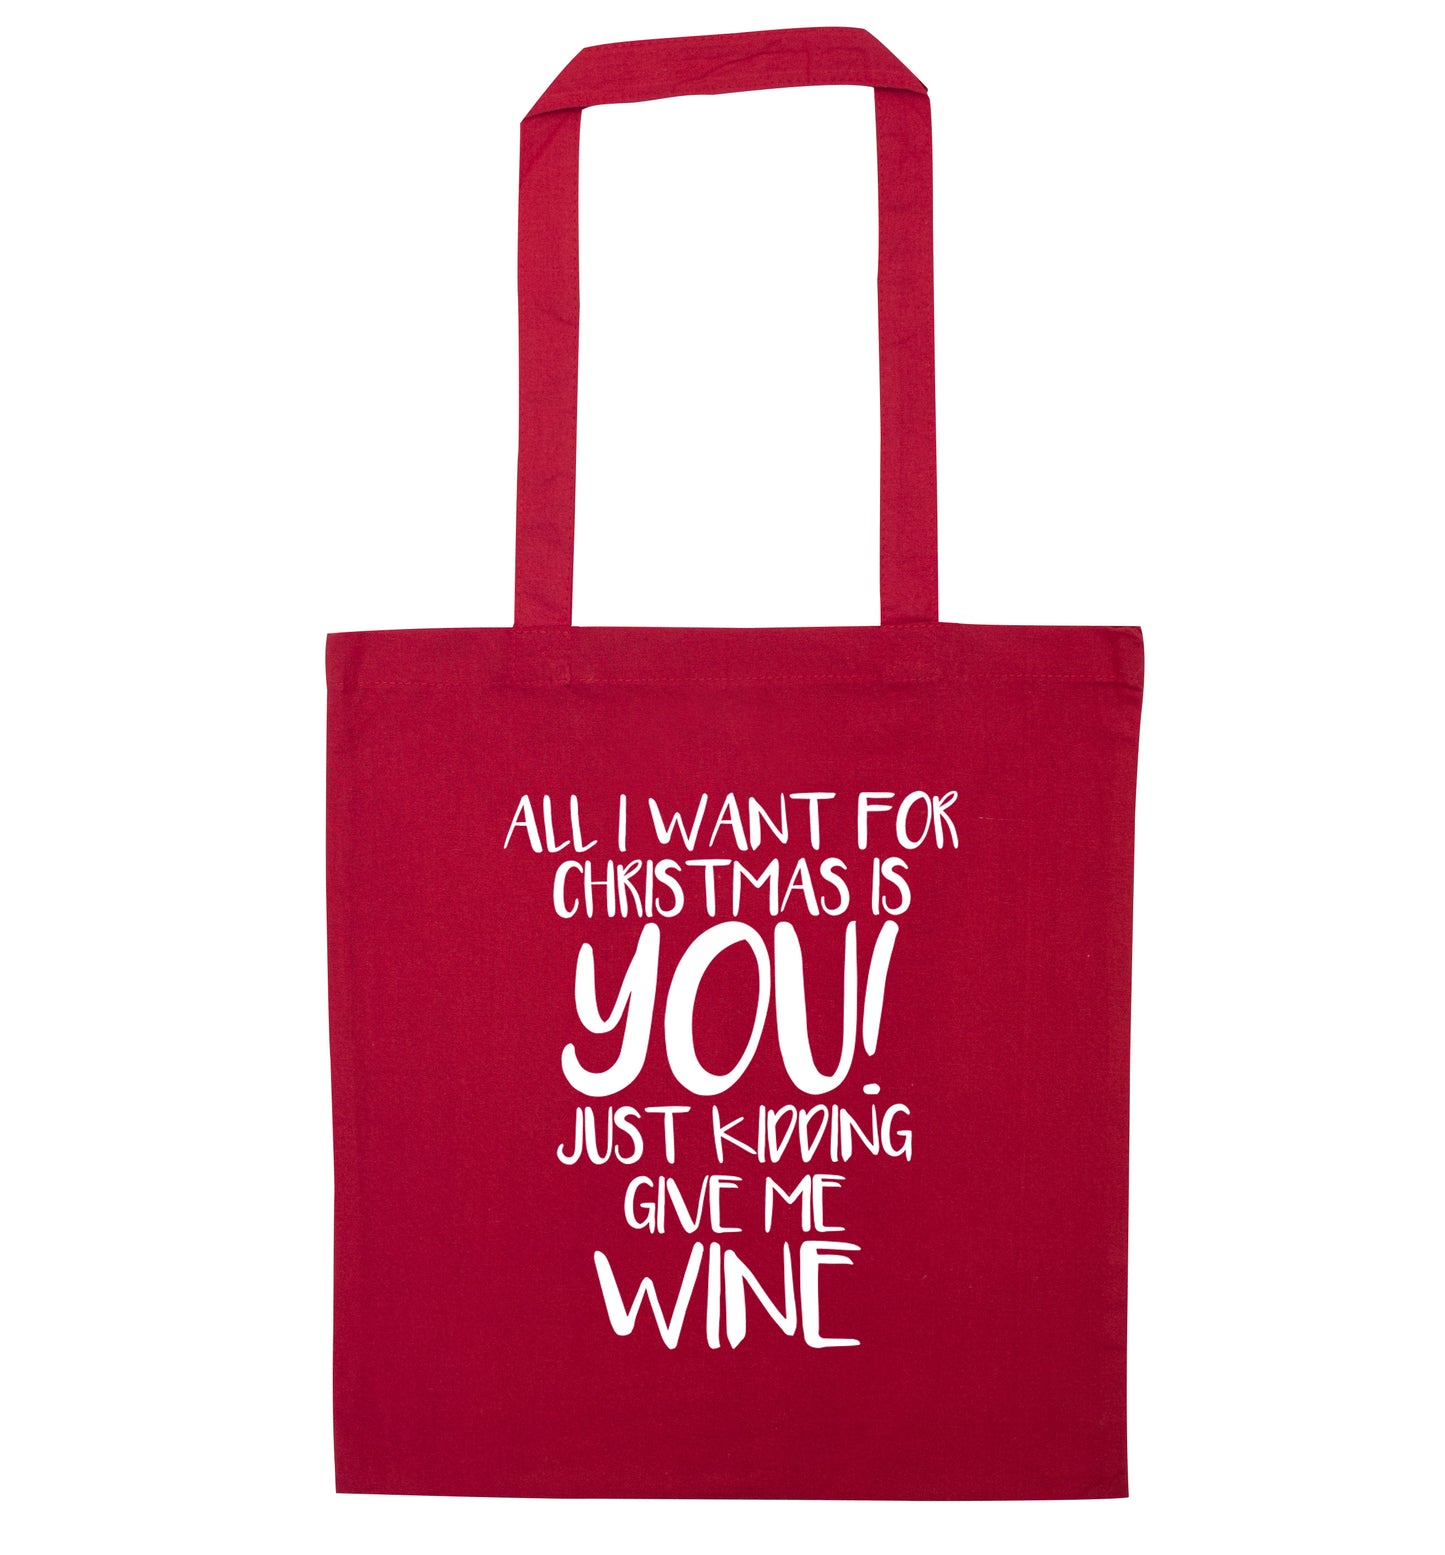 All I want for christmas is you just kidding give me the wine red tote bag